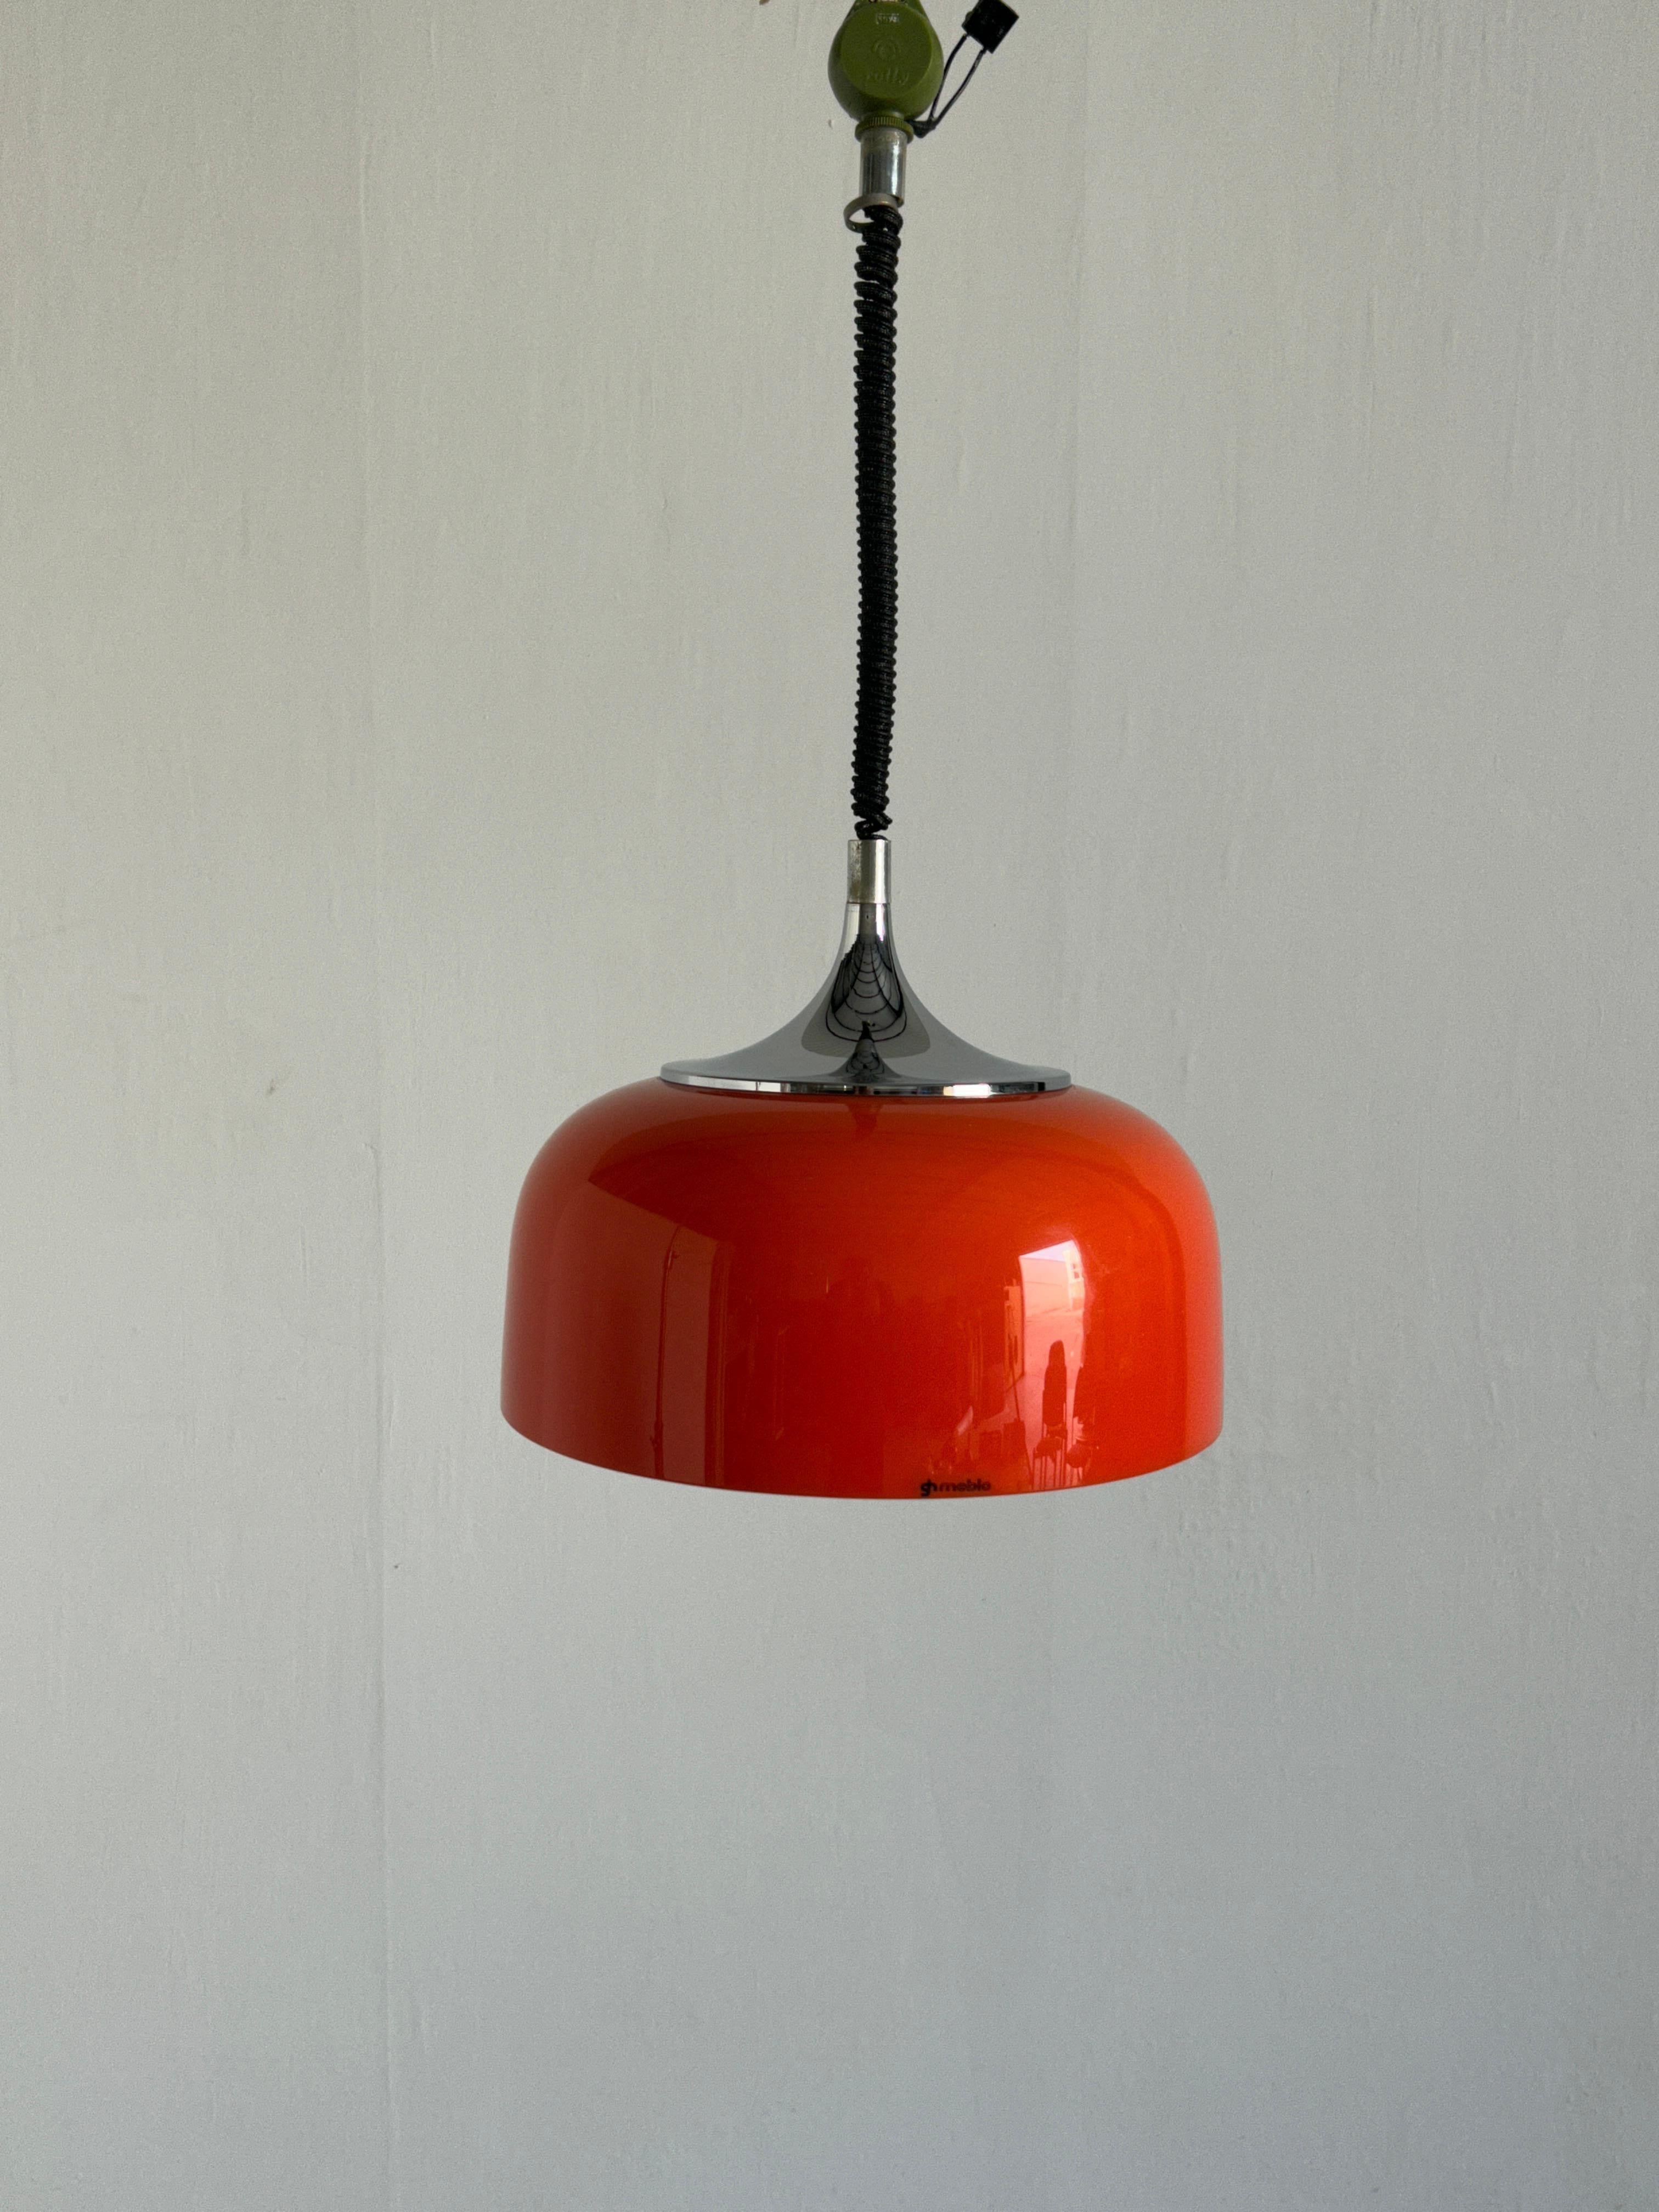 A large and beautiful orange pendant light produced by Meblo for Harvey Guzzini Studio throughout the 1960s-1970s. Made from chromed metal and plastic. In rare orange edition.
Adjustable height with the vintage extension mechanism.

In good vintage